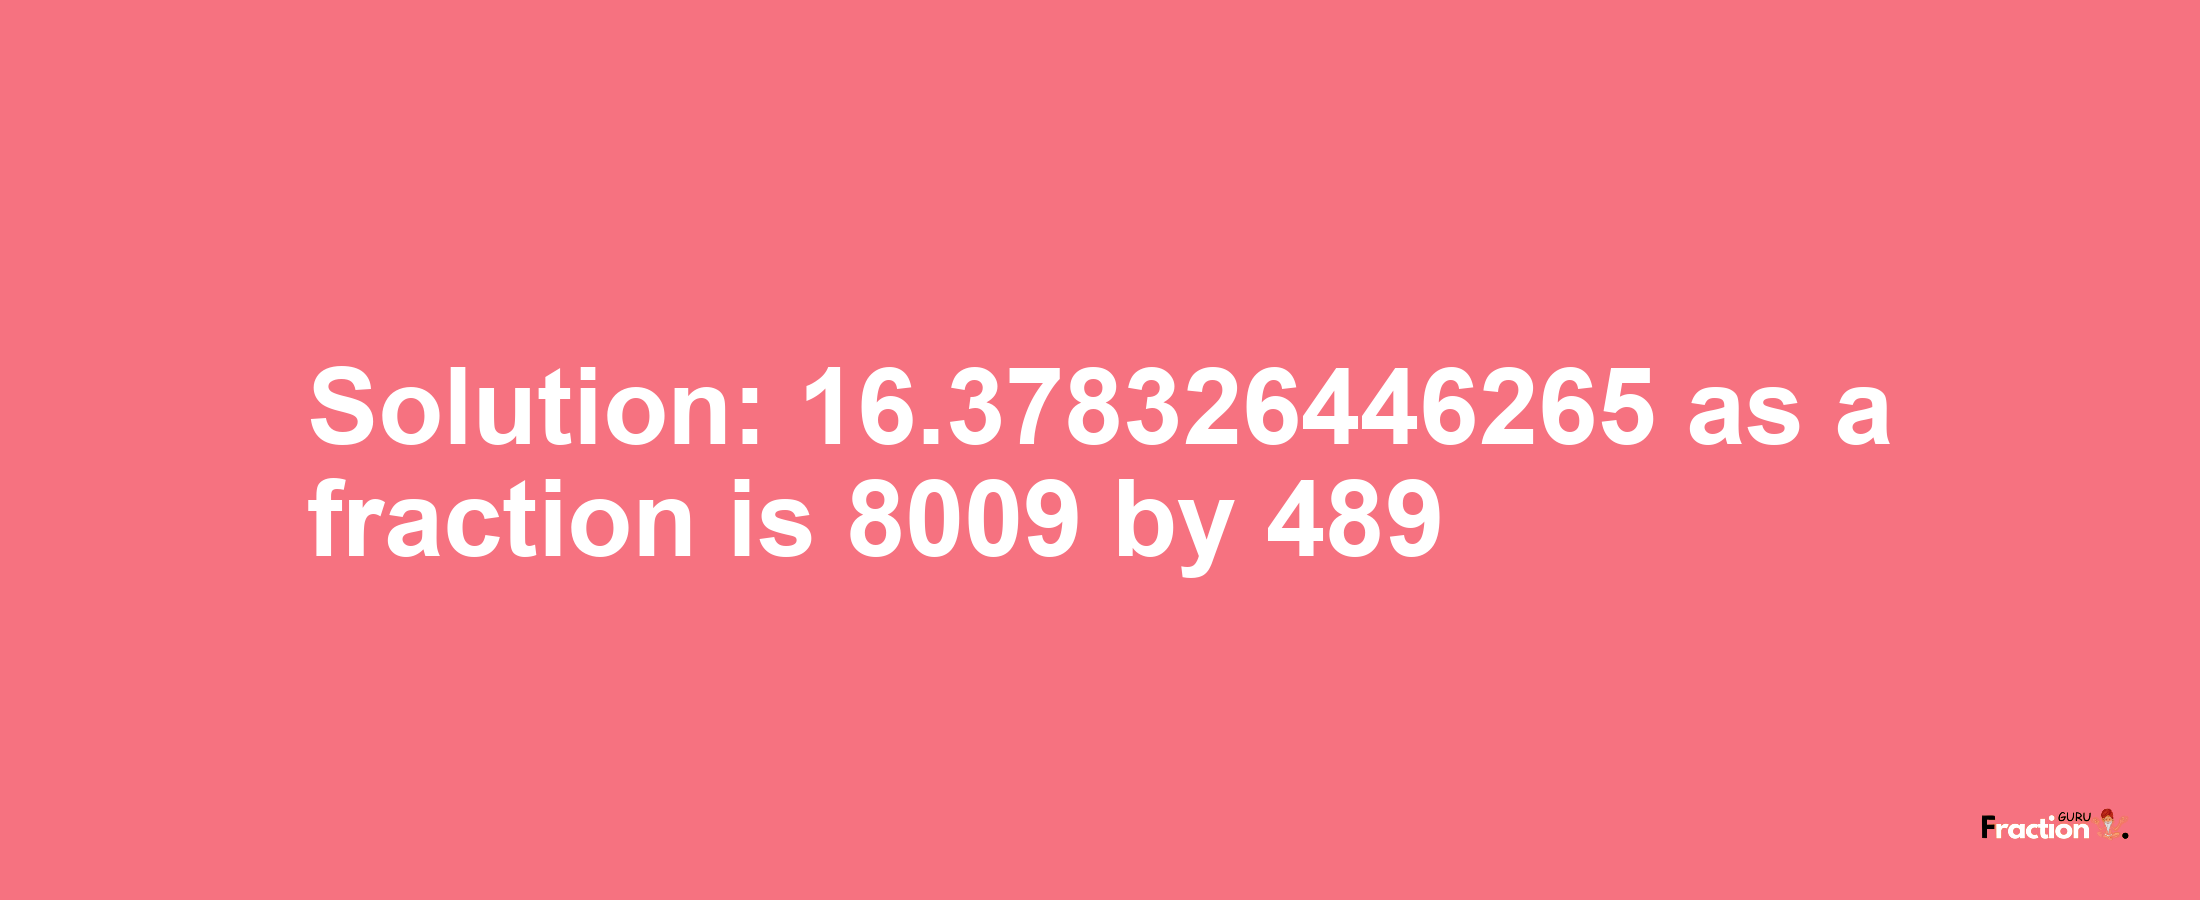 Solution:16.378326446265 as a fraction is 8009/489